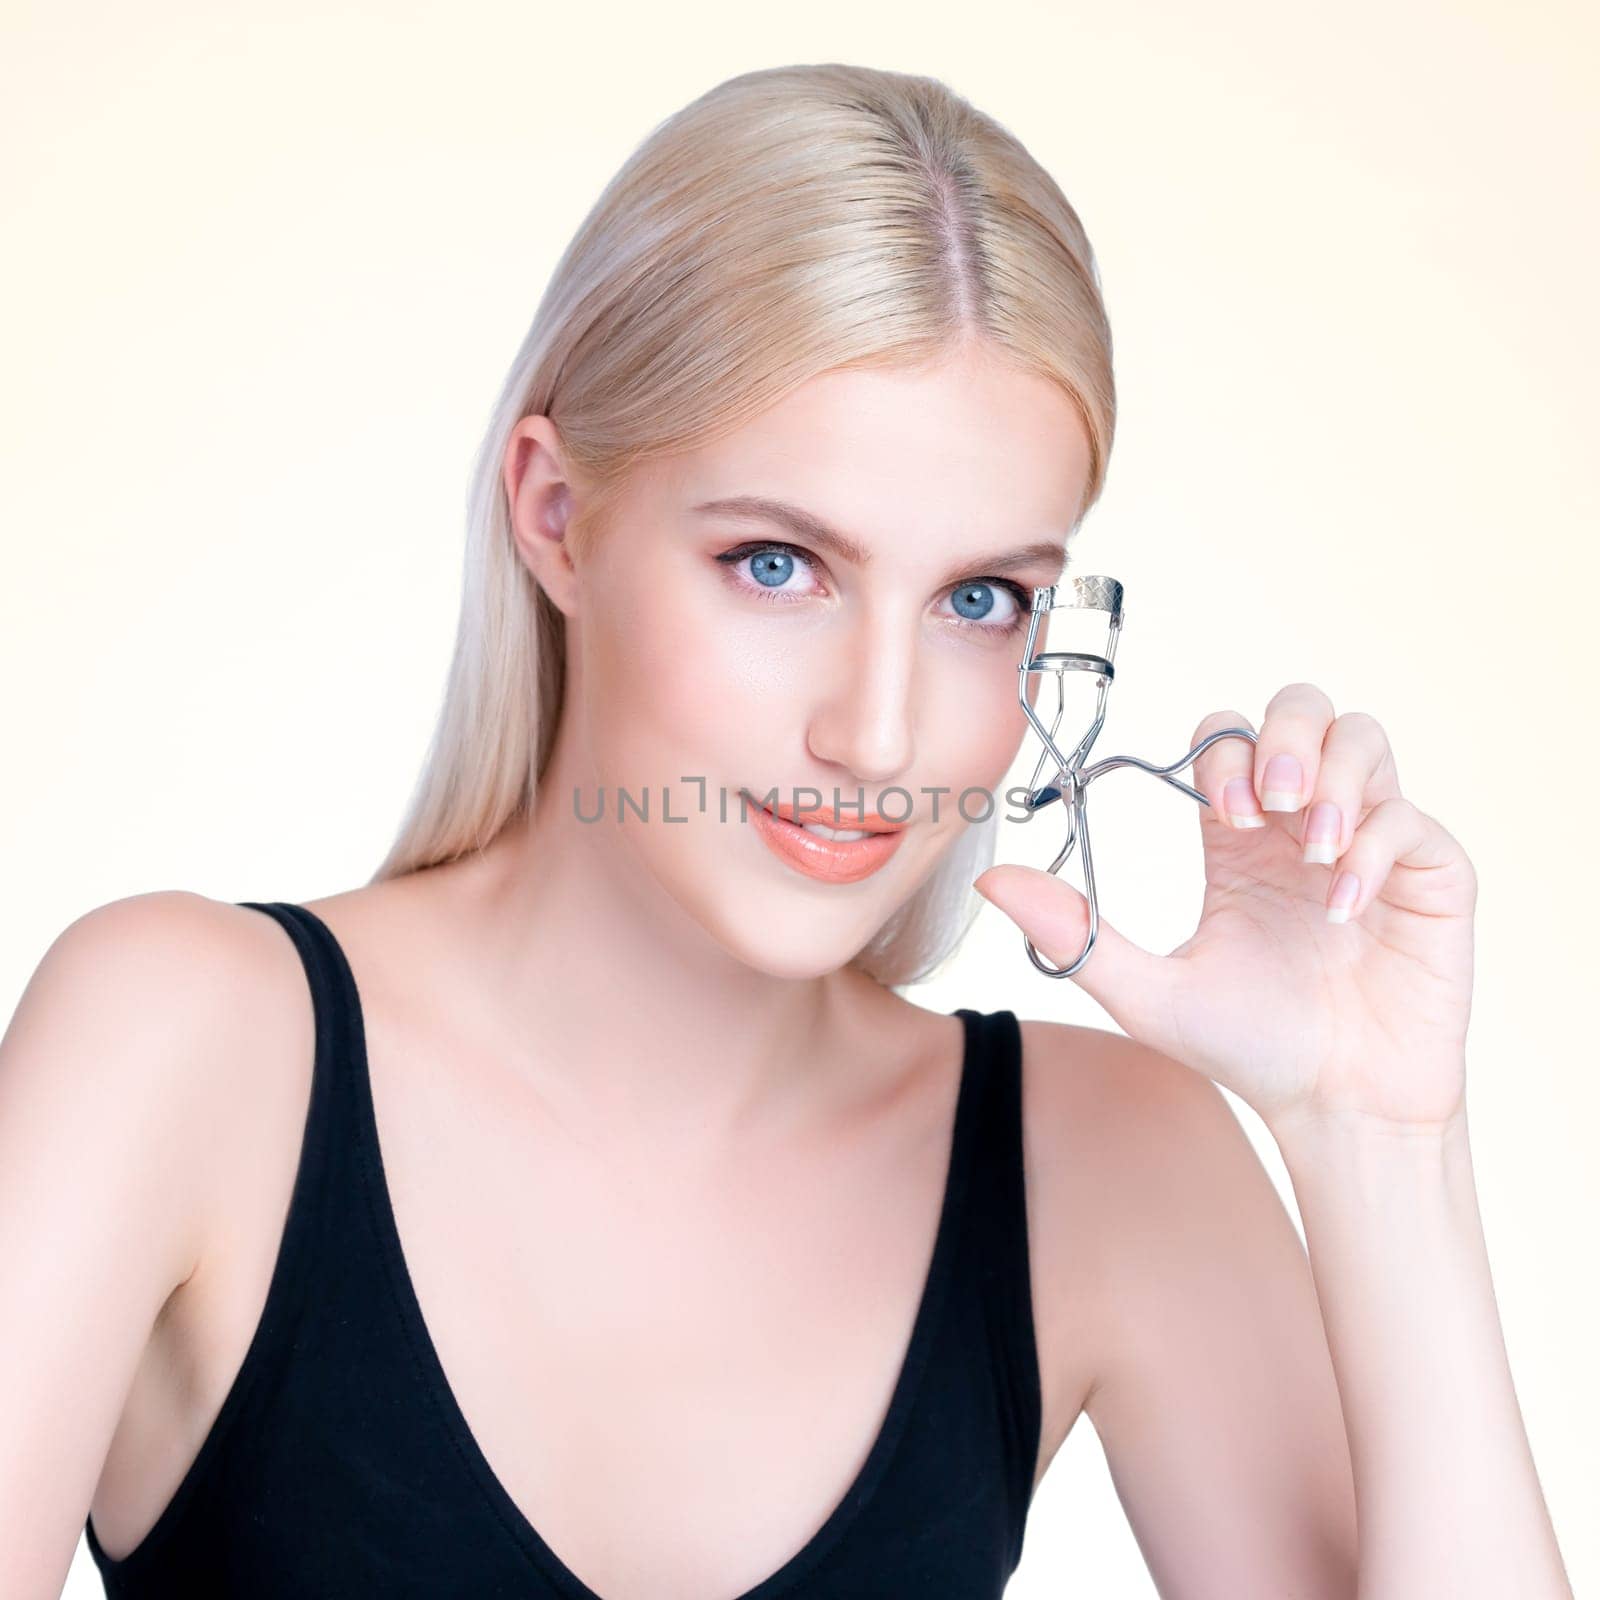 Personable woman correct eyelash curler with alluring facial makeup by biancoblue